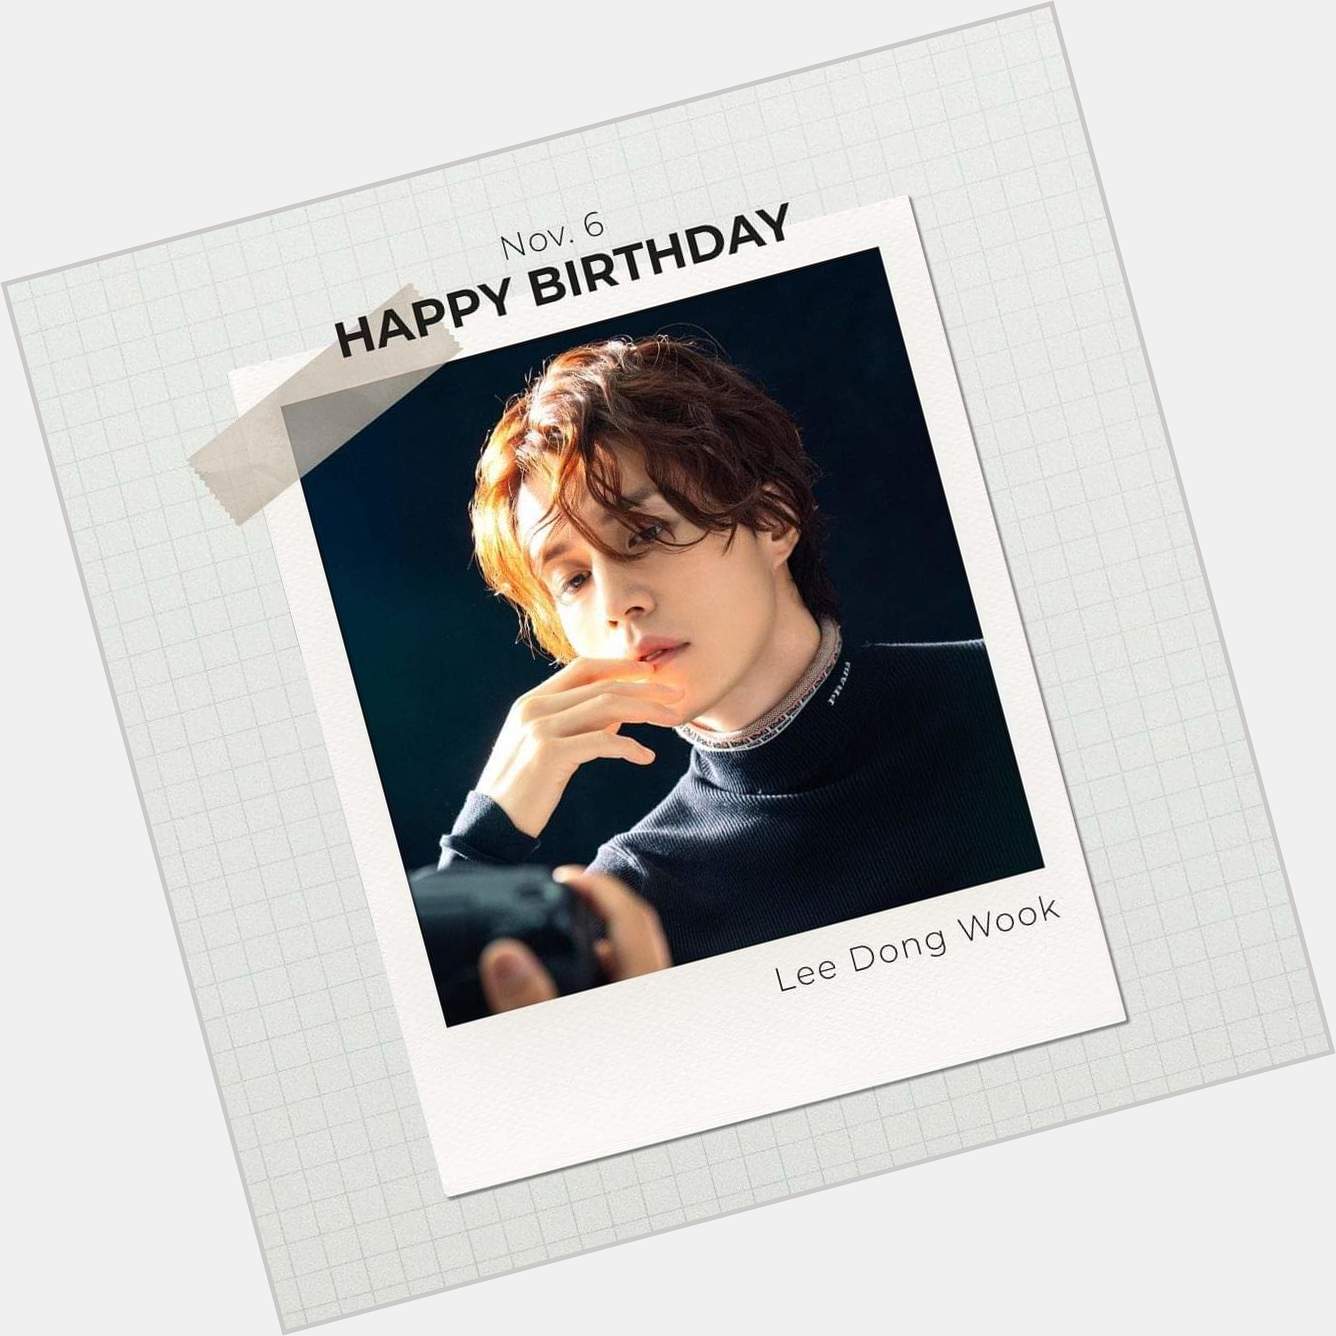    Happy Birthday to Lee Dong Wook     